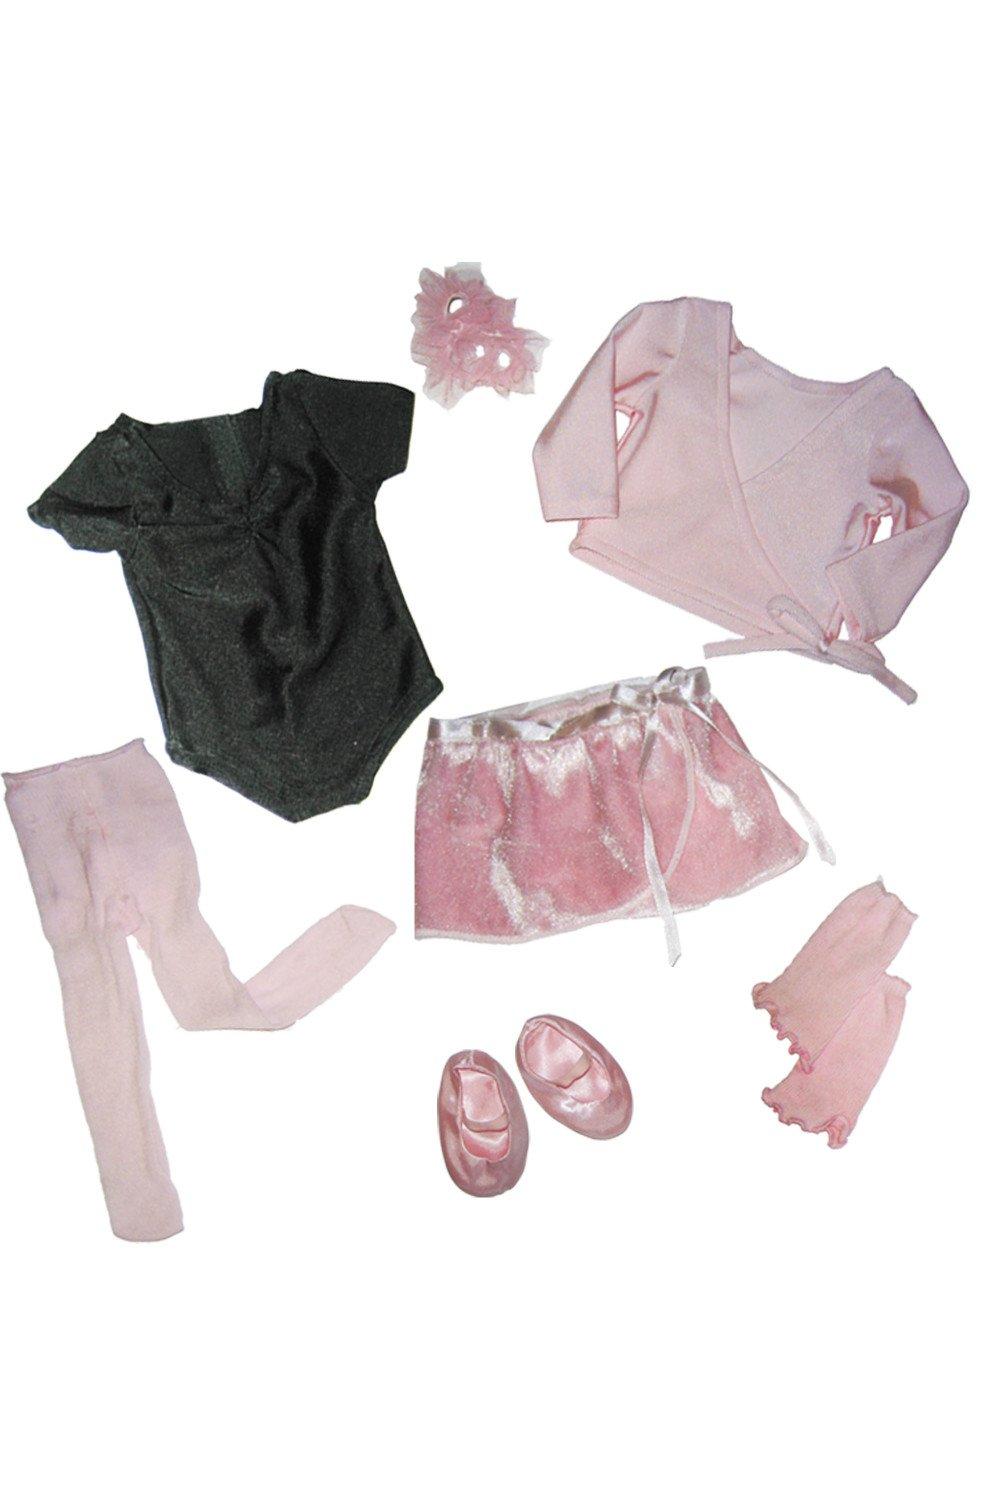 Sophia’s  7 Piece 18" Baby Doll Ballerina Outfit with Shoes Set